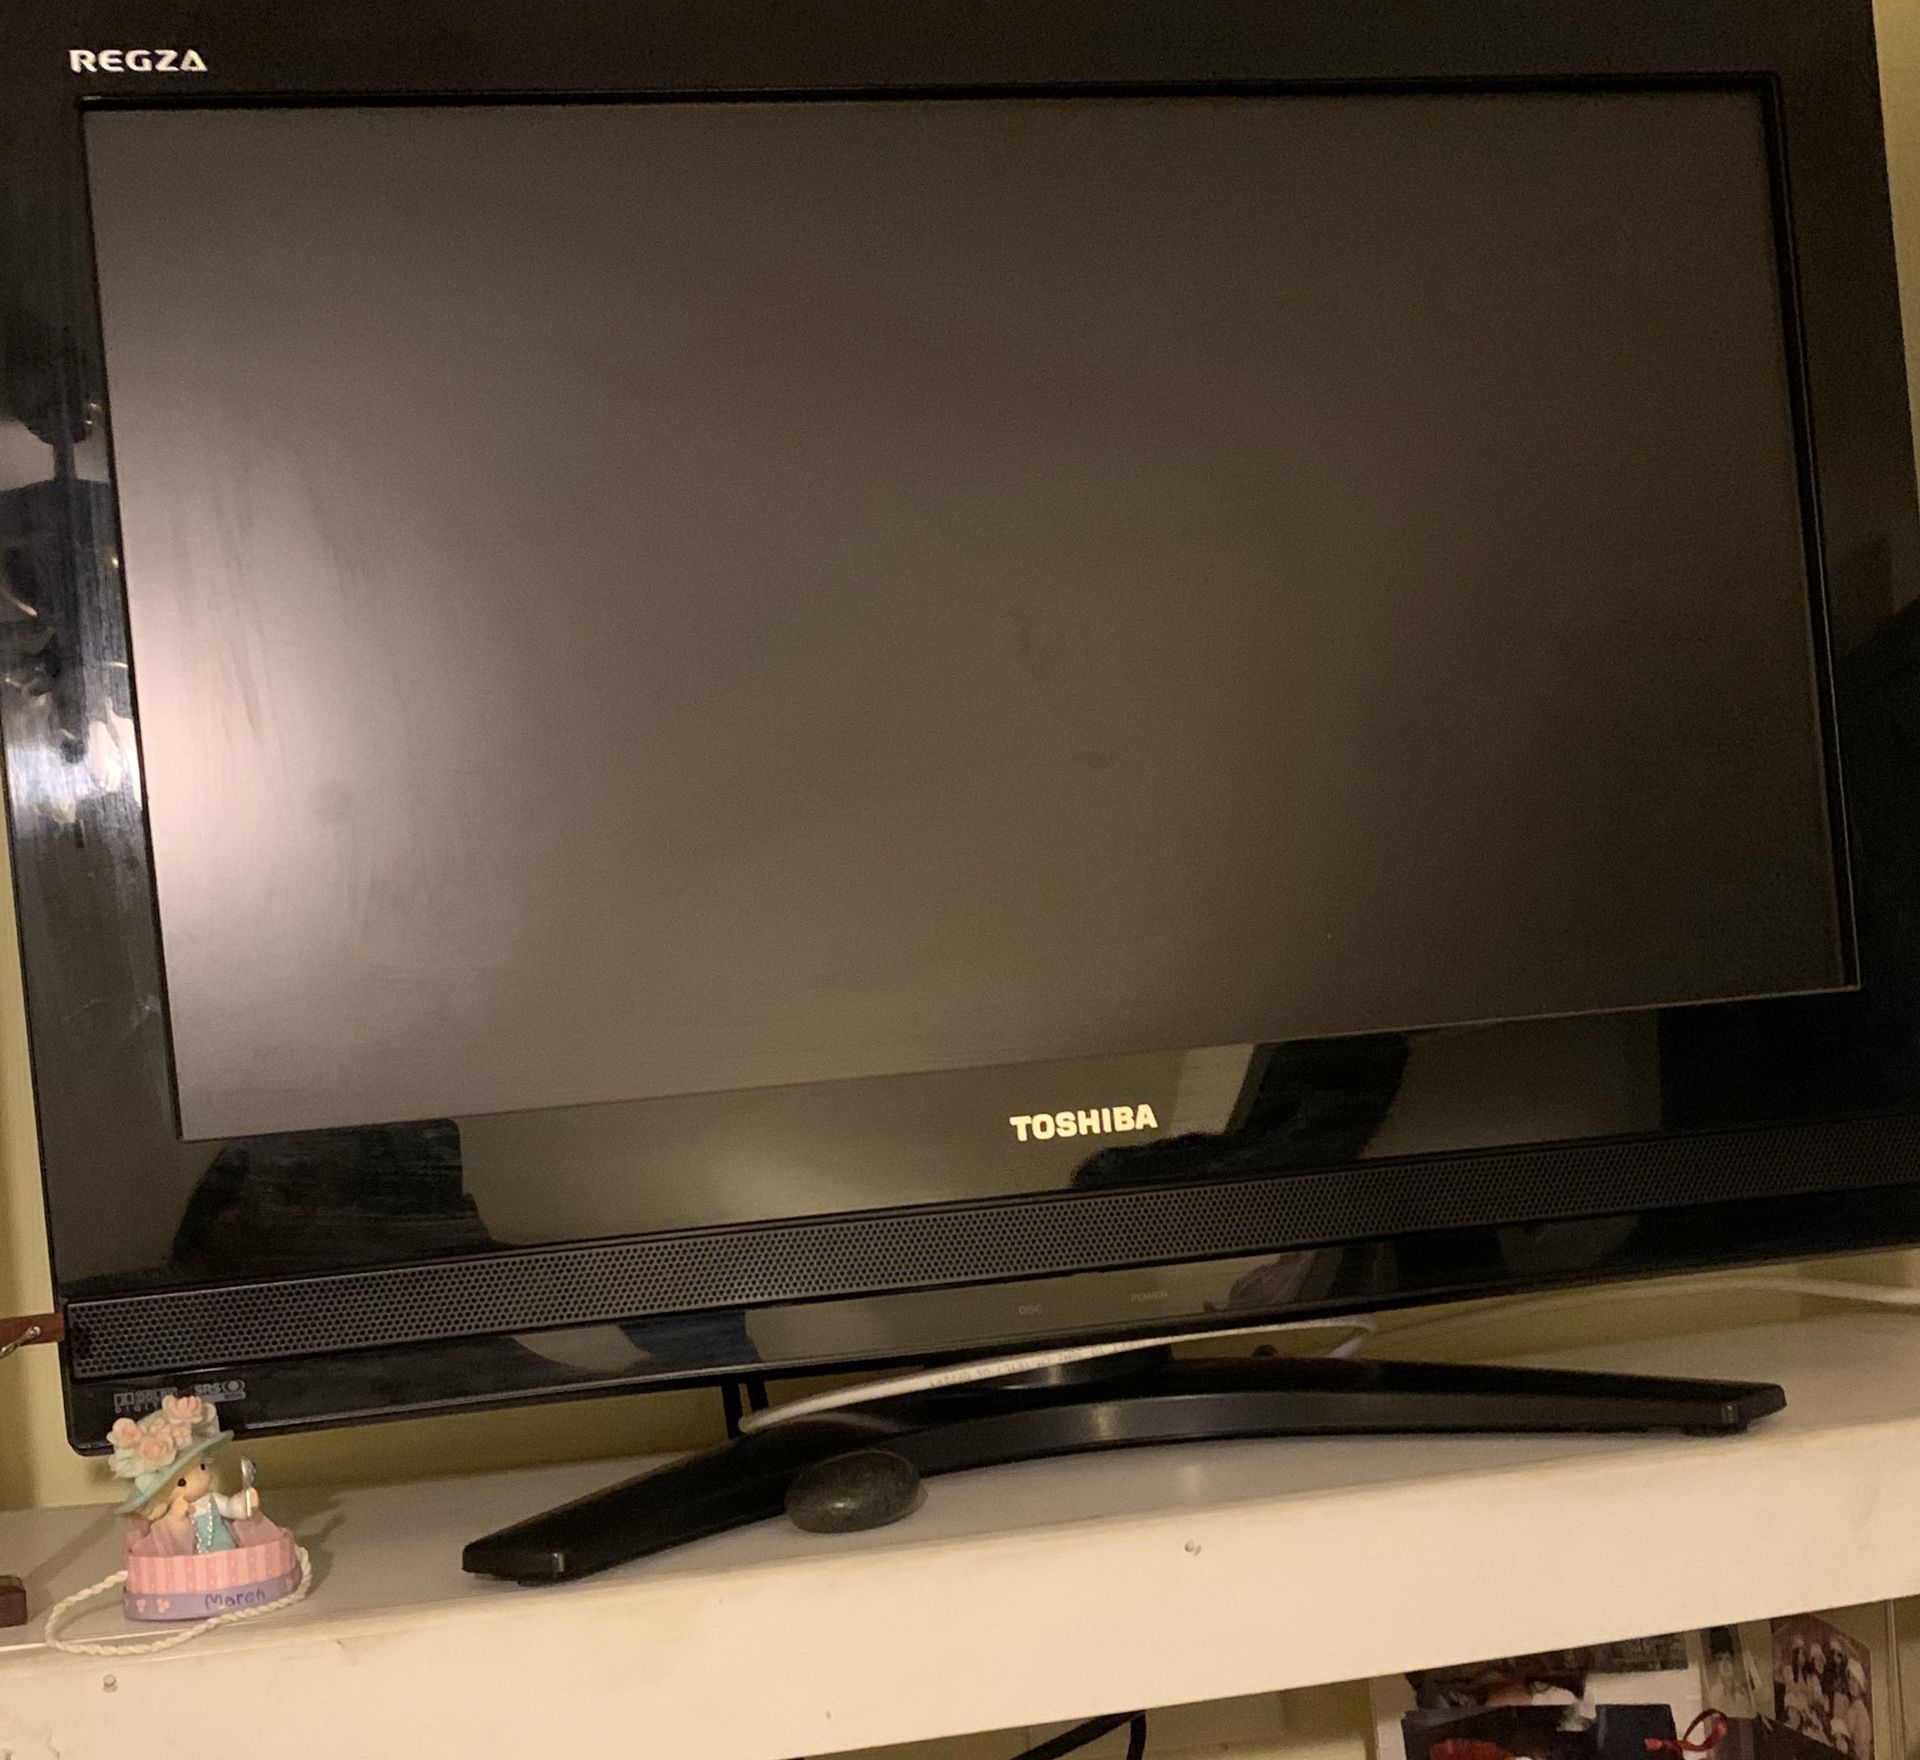 Toshiba 22 inch built-in DVD player